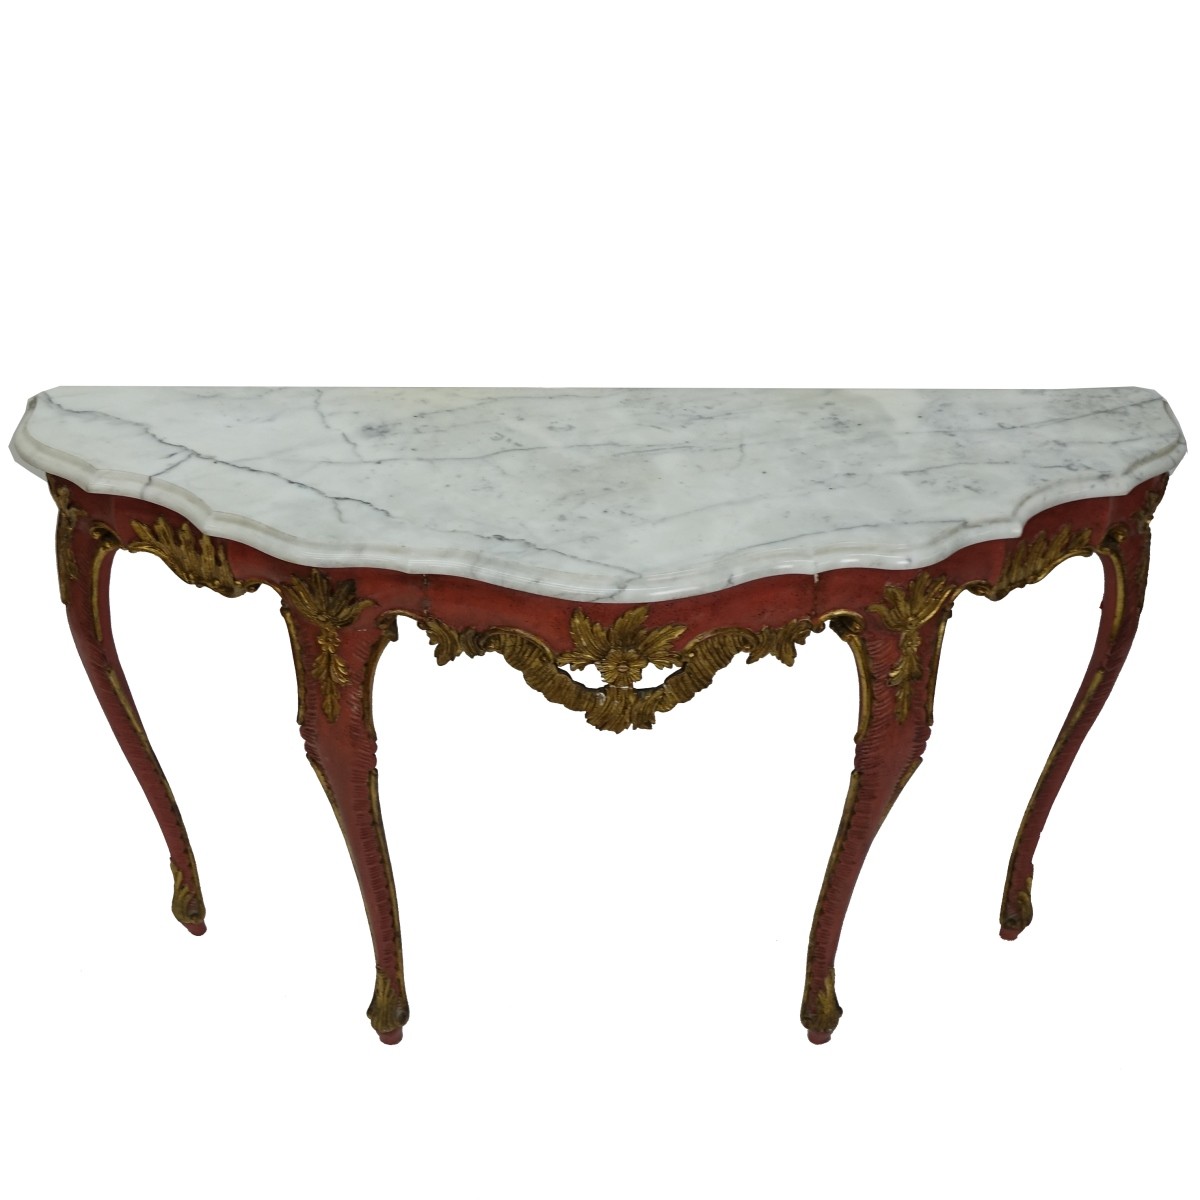 Antique Italian Marble Top Console Table